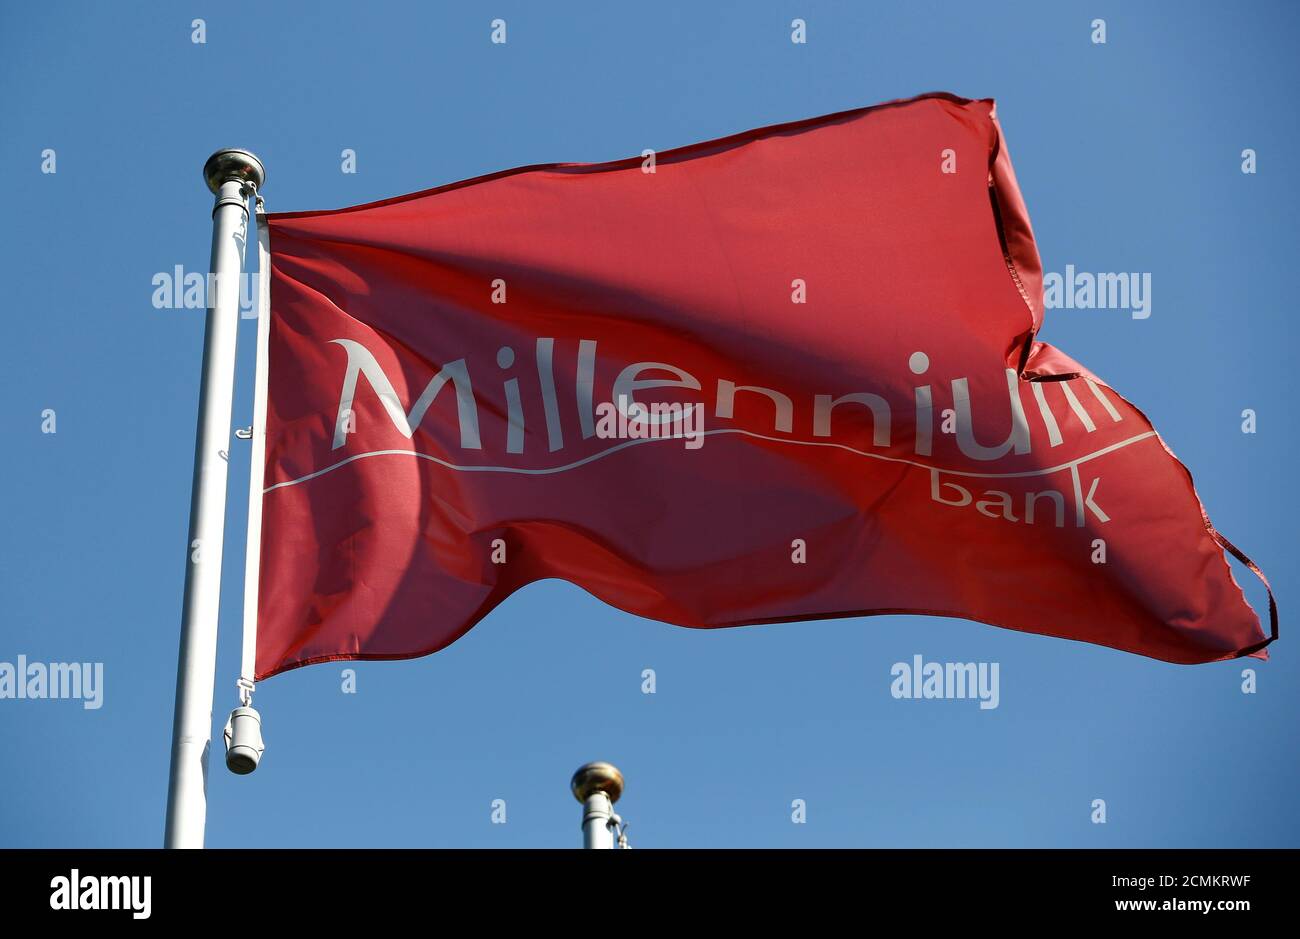 A logo of Millennium bank, Polish unit of Portugal's Millennium BCP, is  pictured on the flag